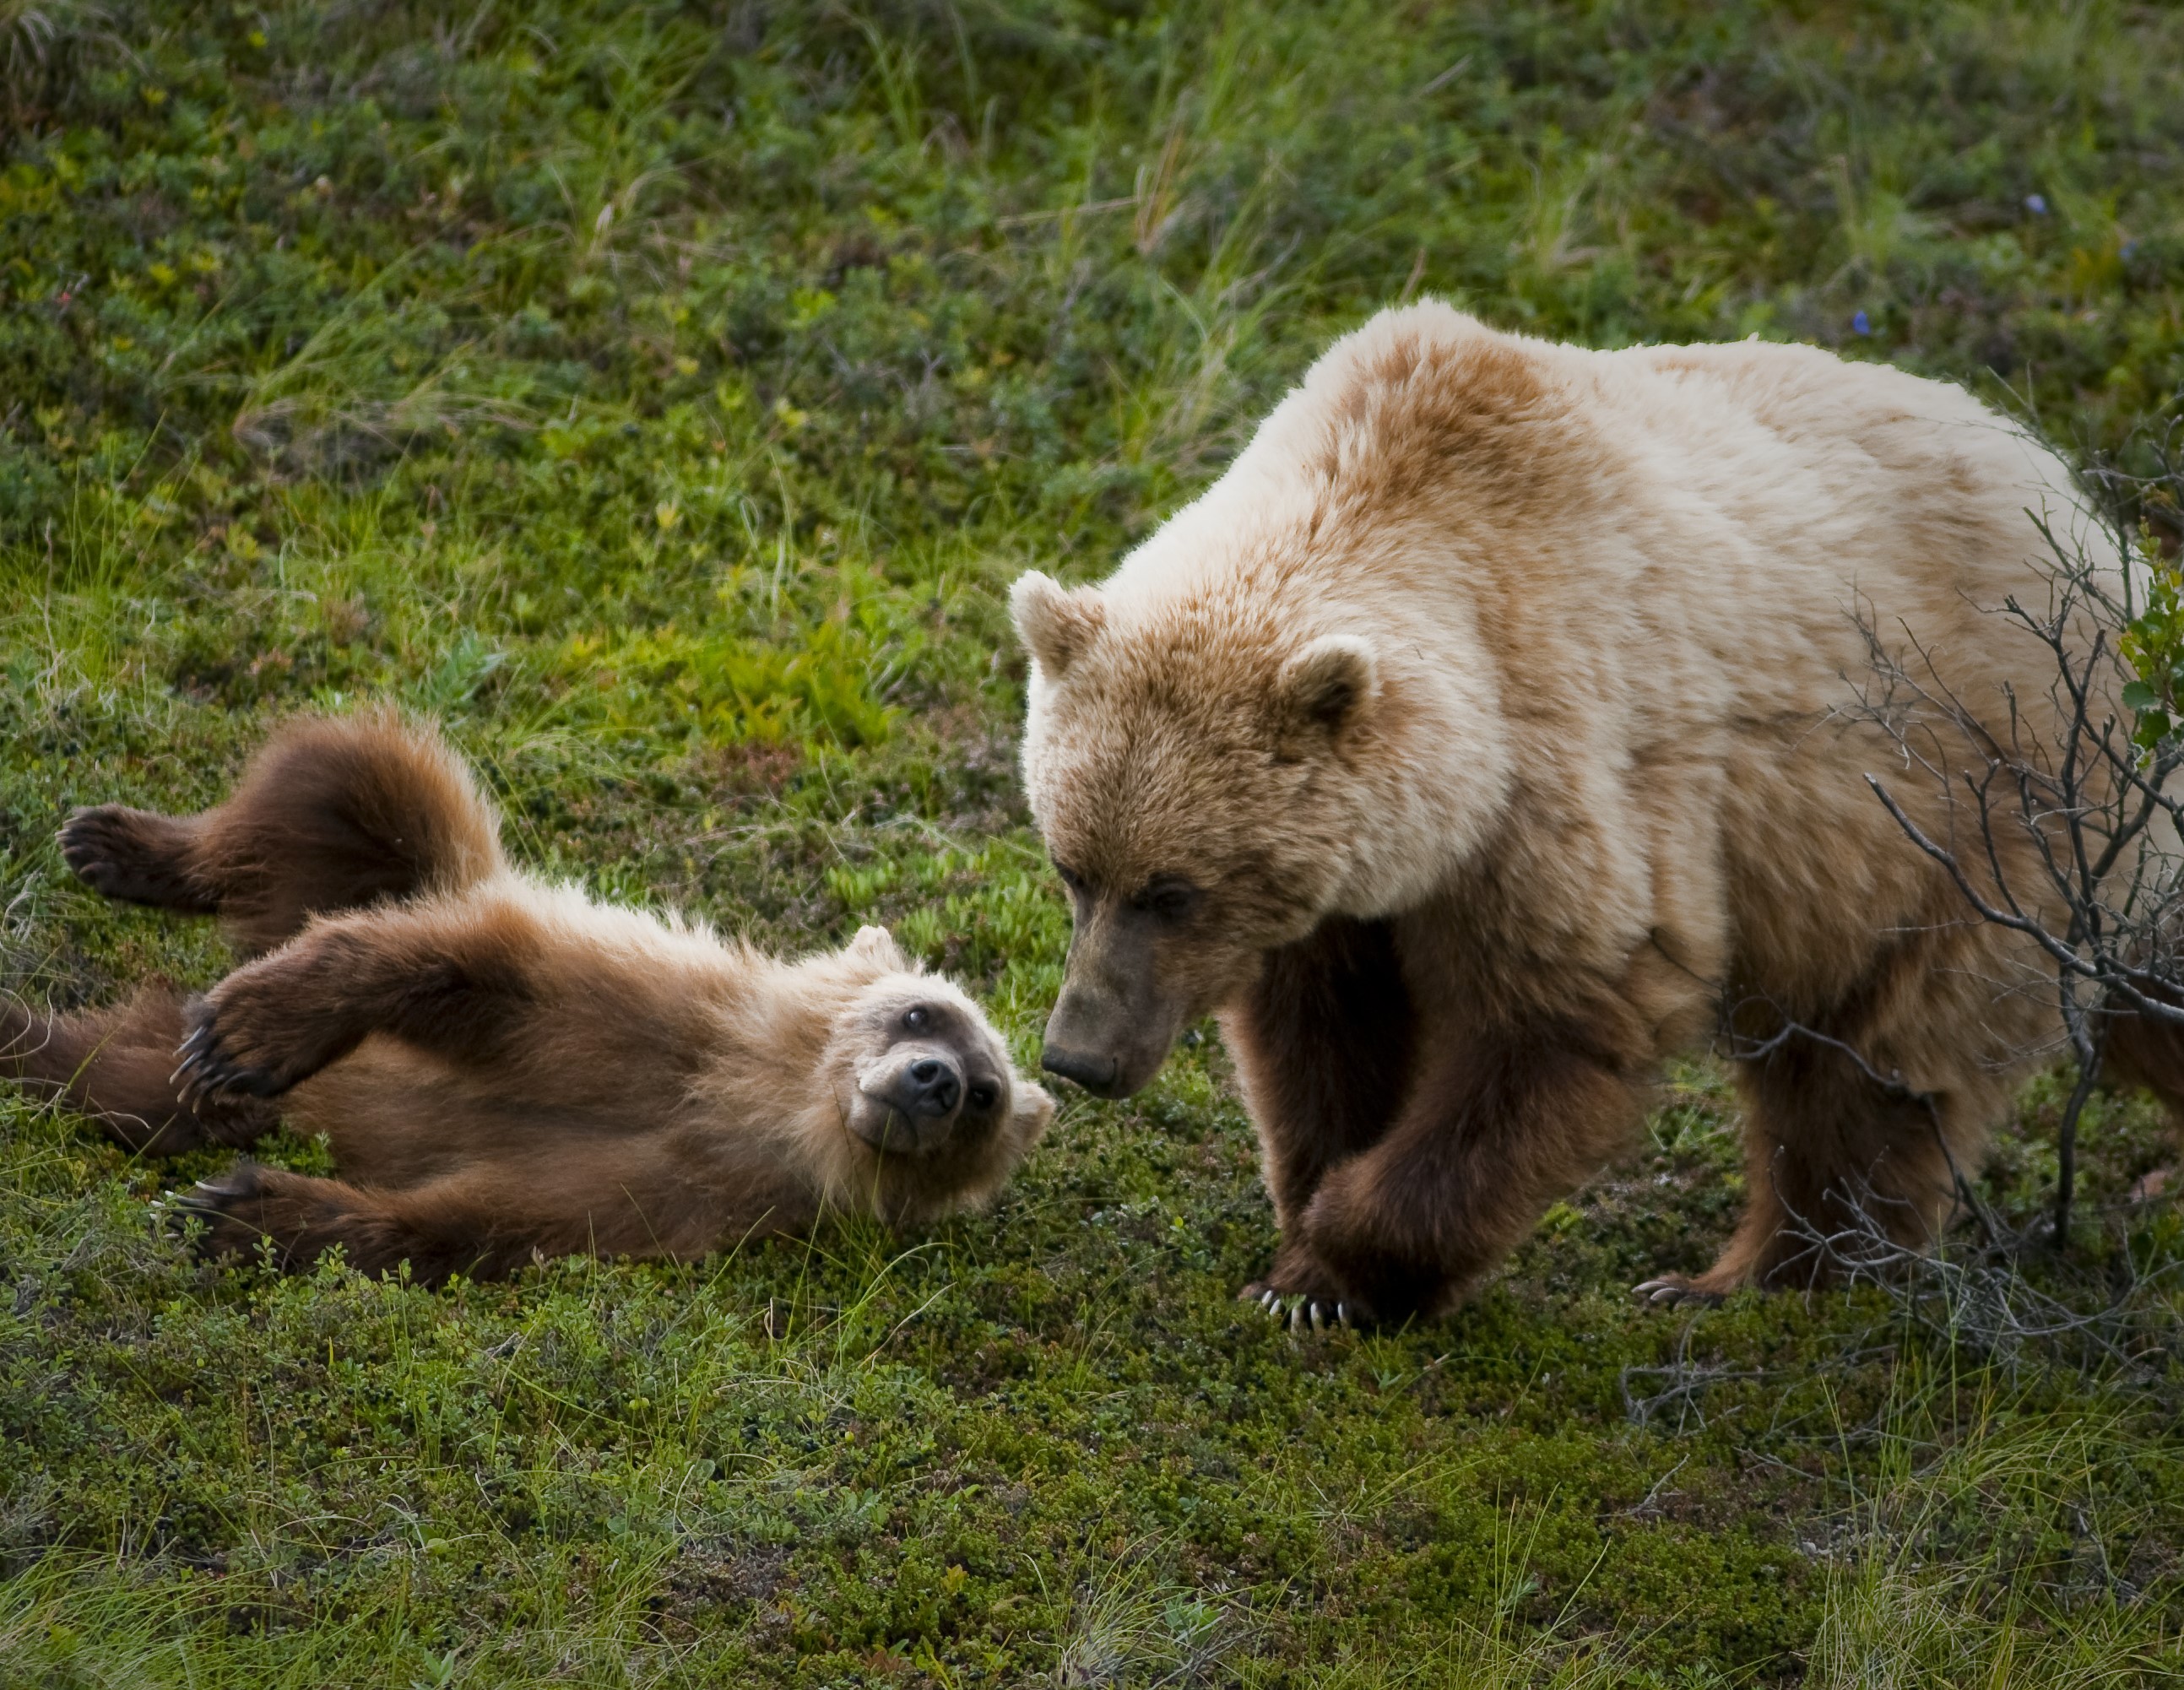 Grizzly bear sow and cub in lush green foliage.